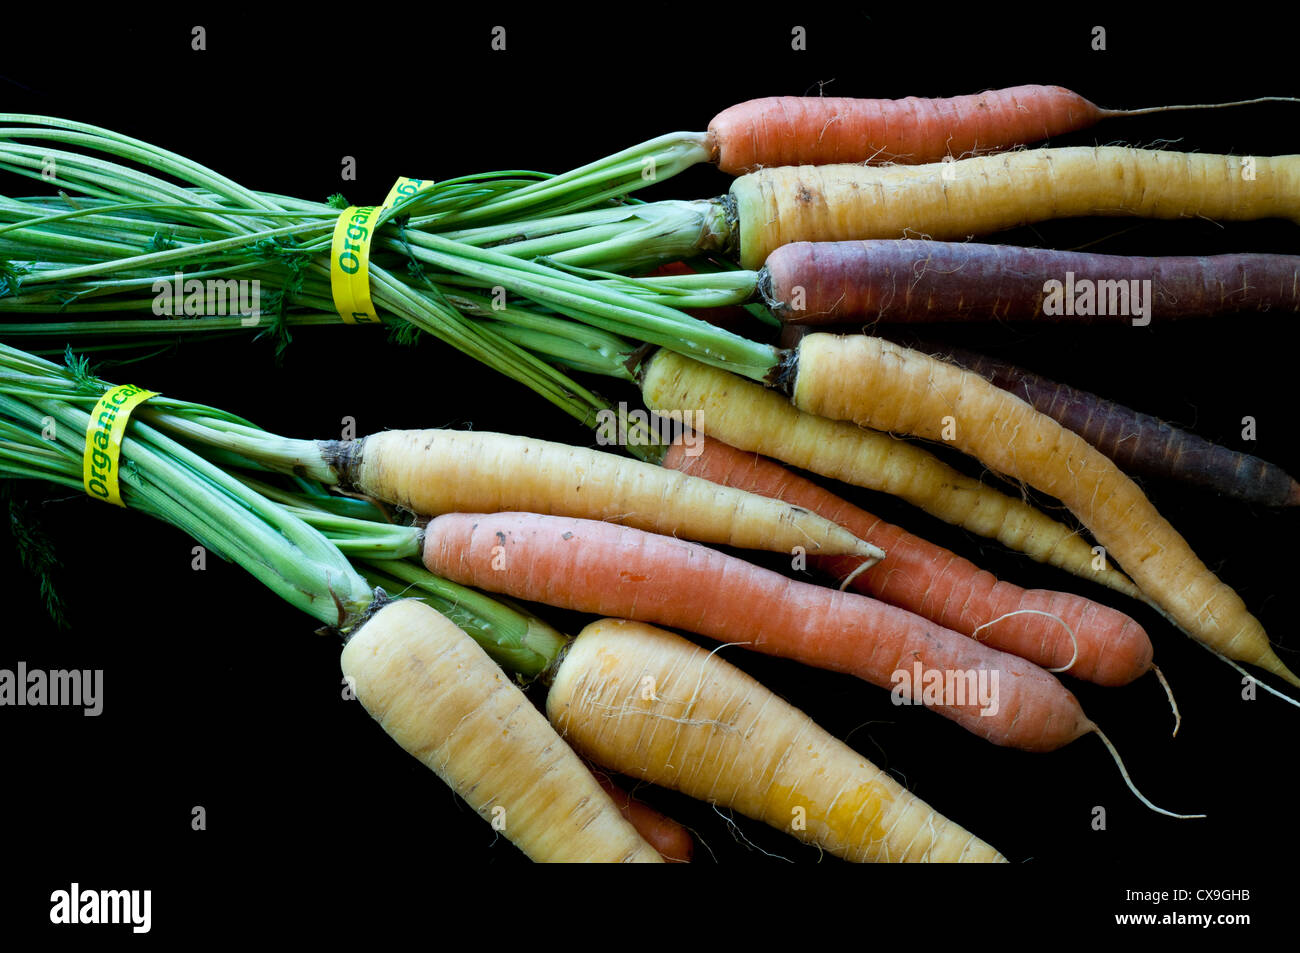 Two bunches of organic multi-colored carrots Stock Photo